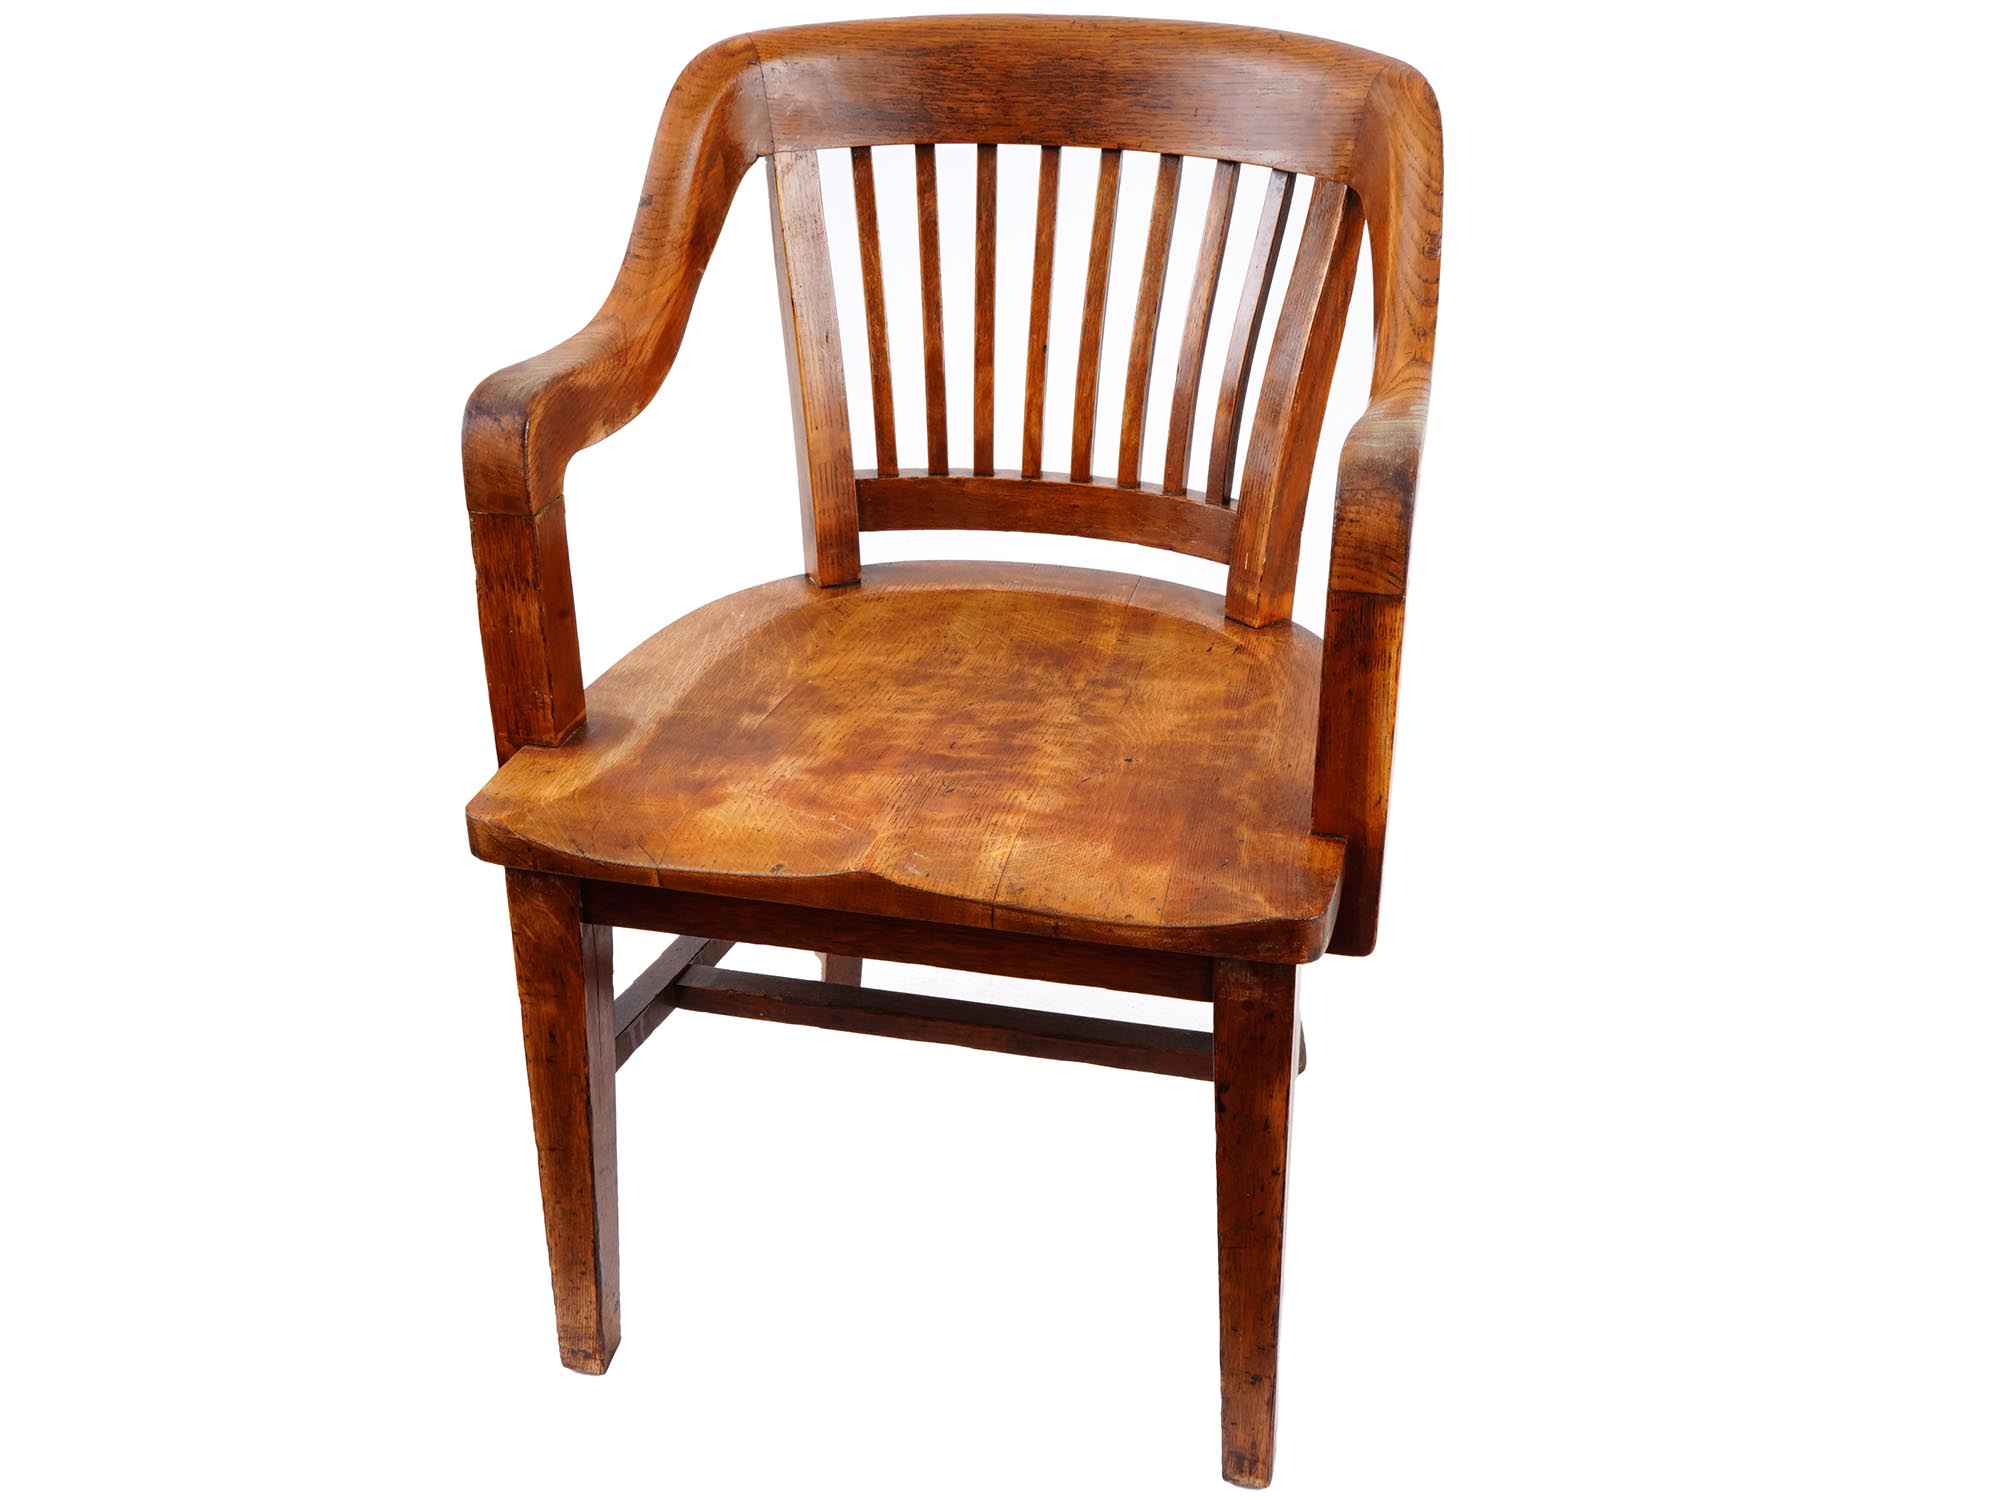 ANTIQUE AMERICAN WOODEN CHAIR BY MILWAUKEE CHAIR CO. PIC-0